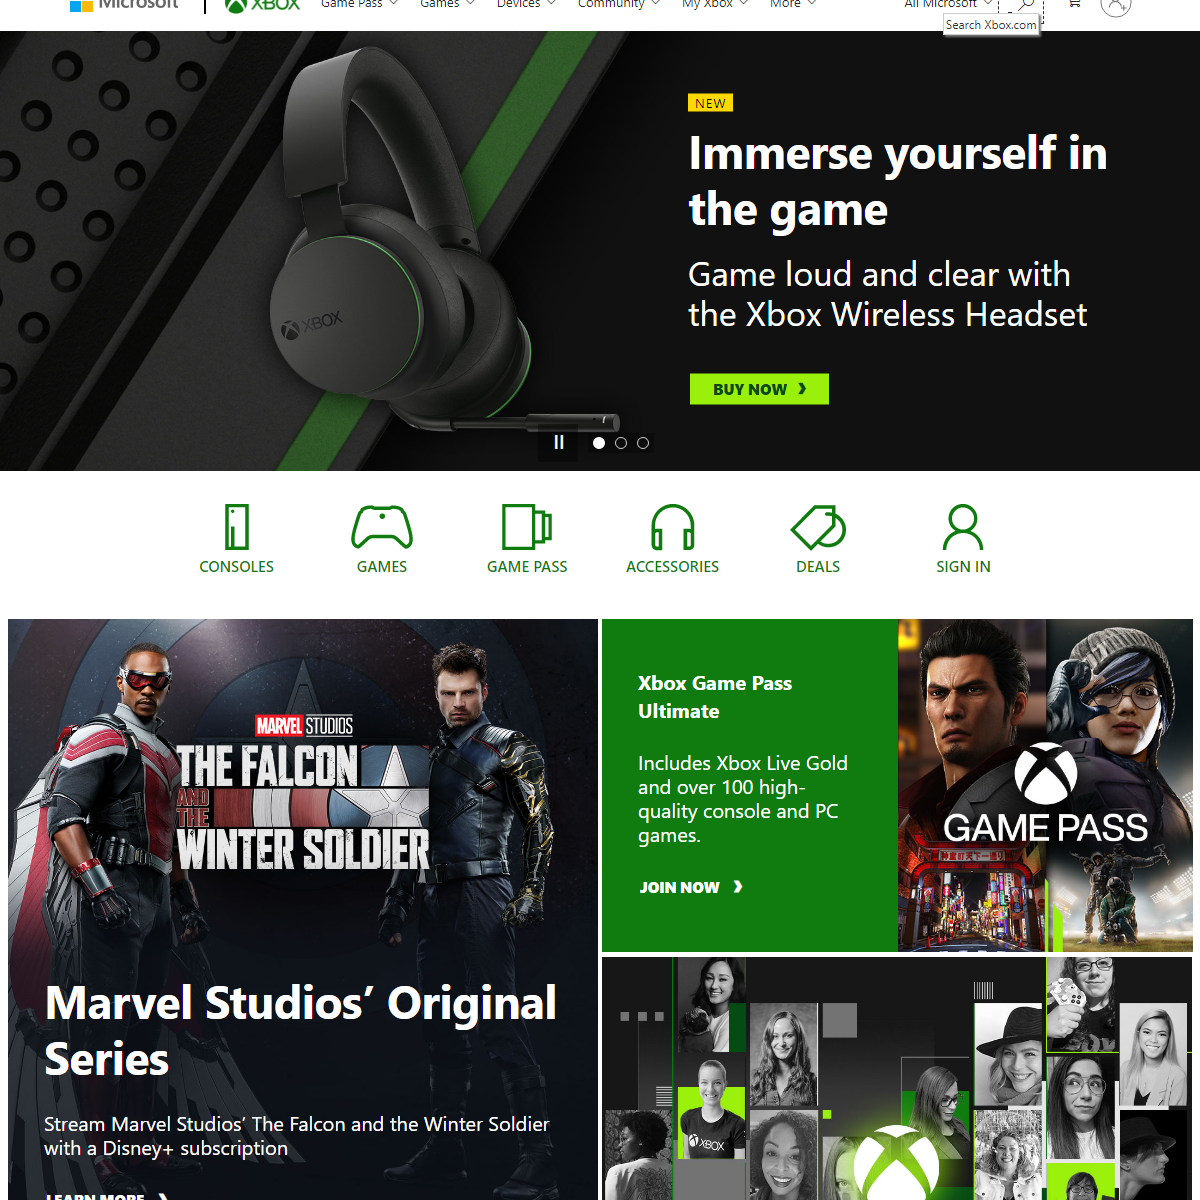 A complete backup of https://www.xbox.com/